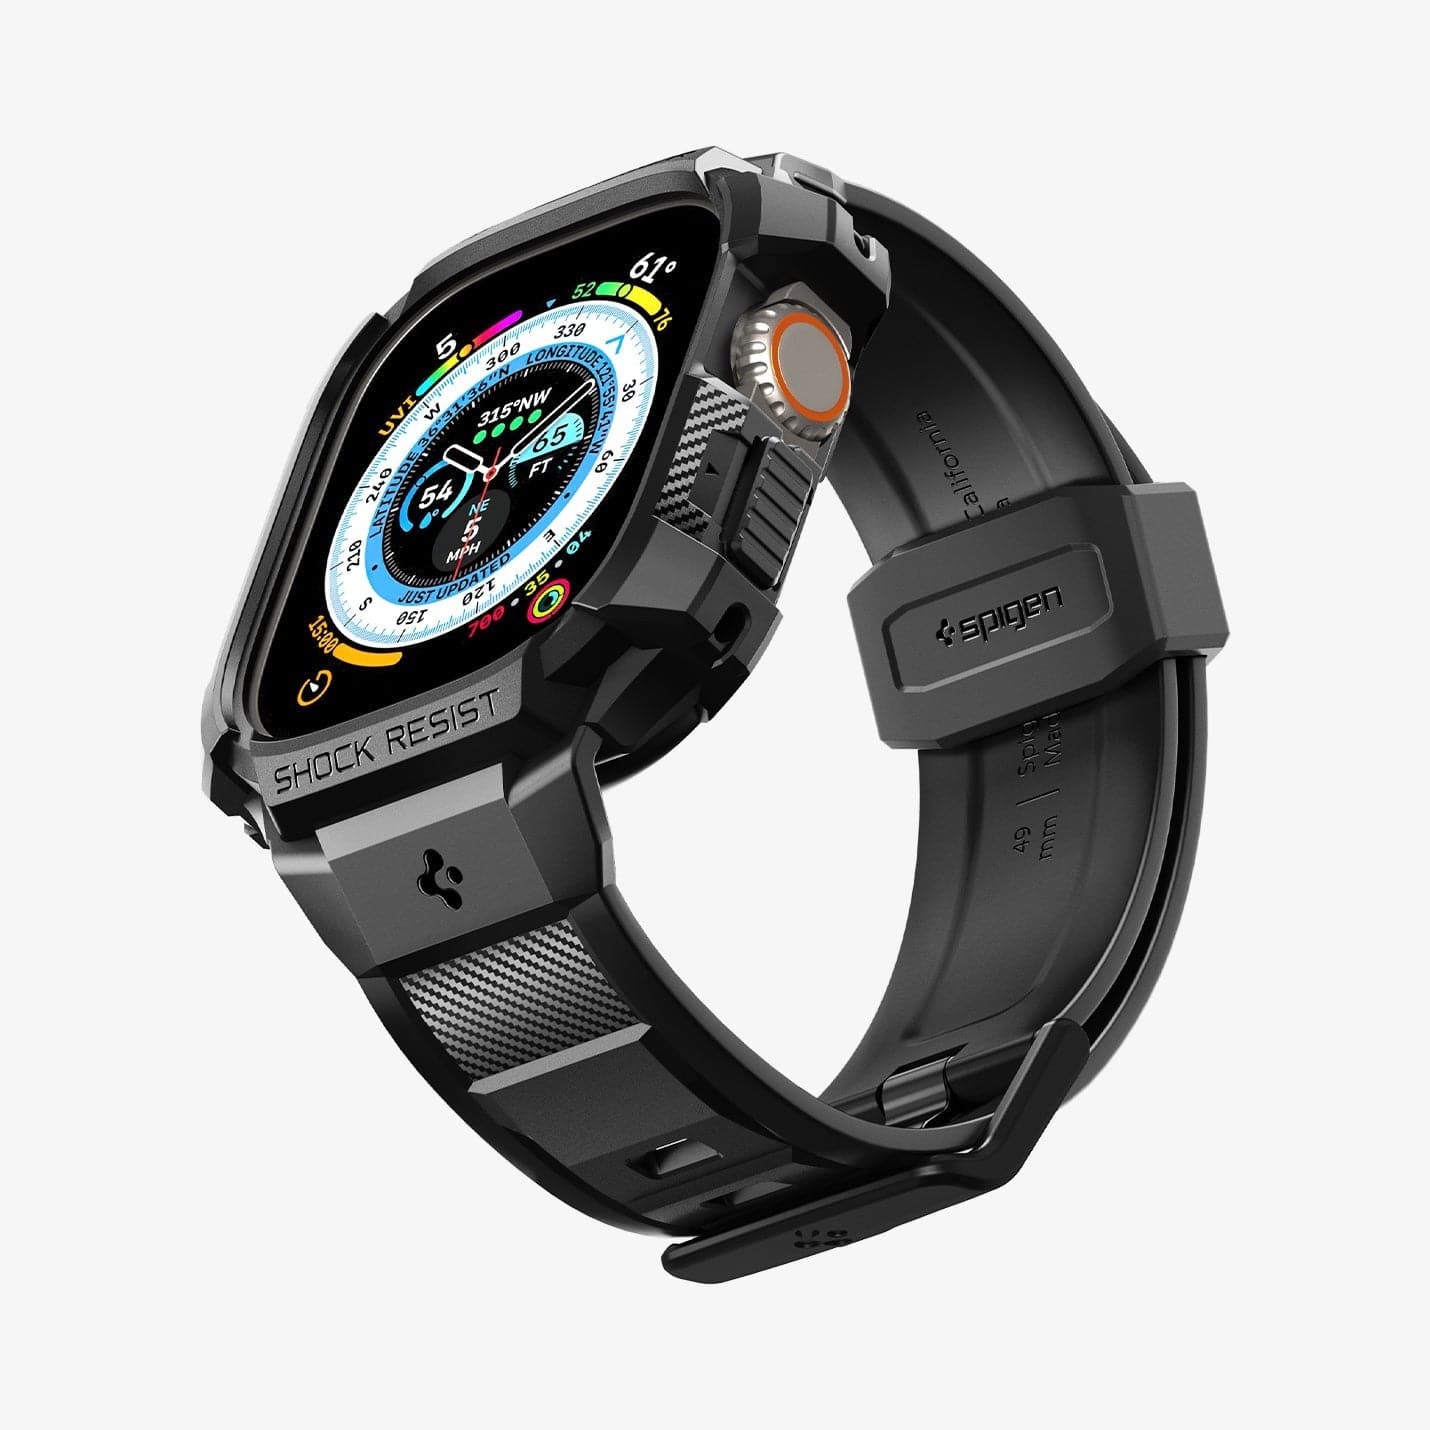 ACS05460 - Apple Watch Series (Apple Watch (49mm)) in matte black showing the front, bottom and side